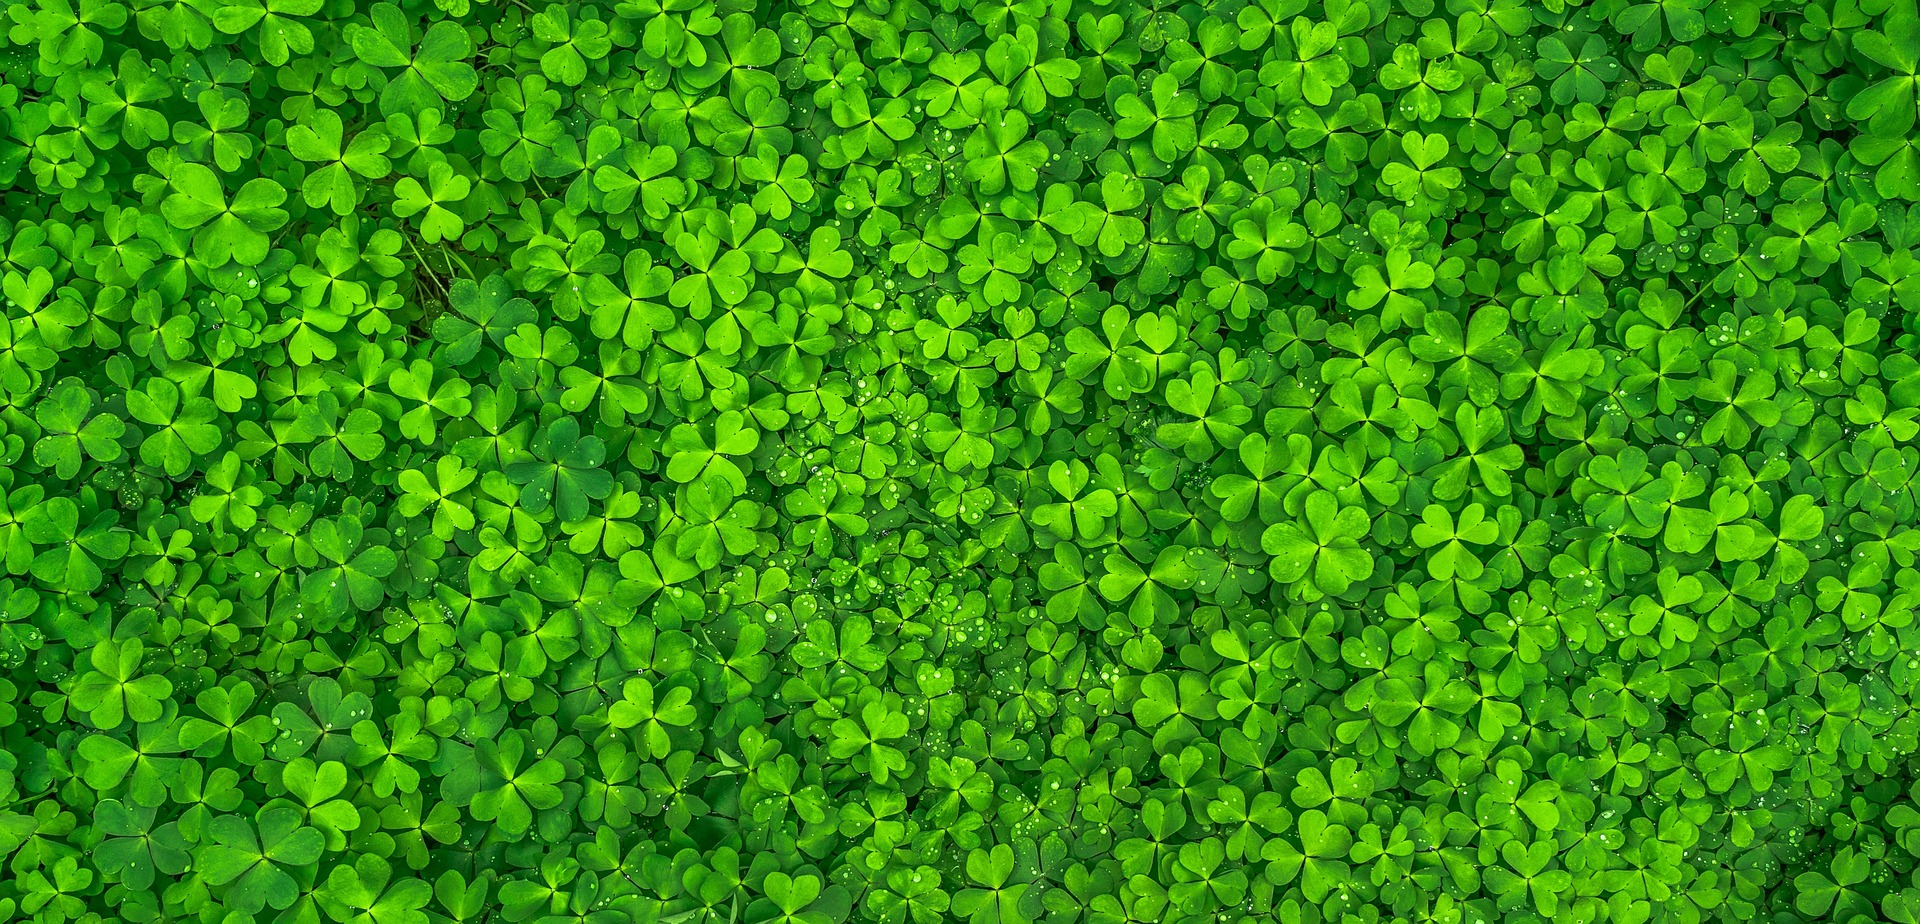 A field of clovers meant to symbolize luck